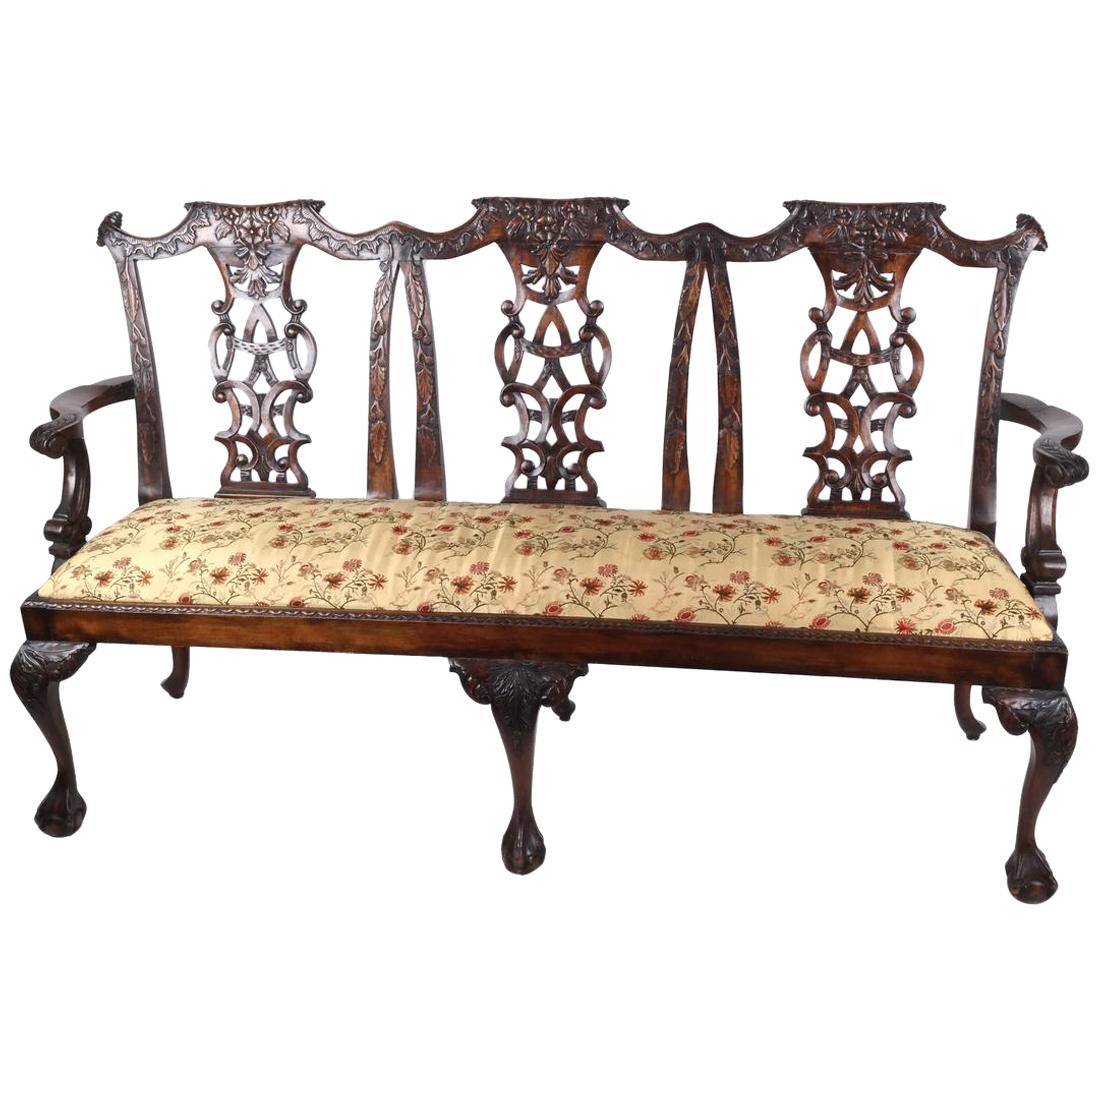 Fine Chippendale Style Carved Mahogany Triple Chair Back Settee, 19th Century For Sale